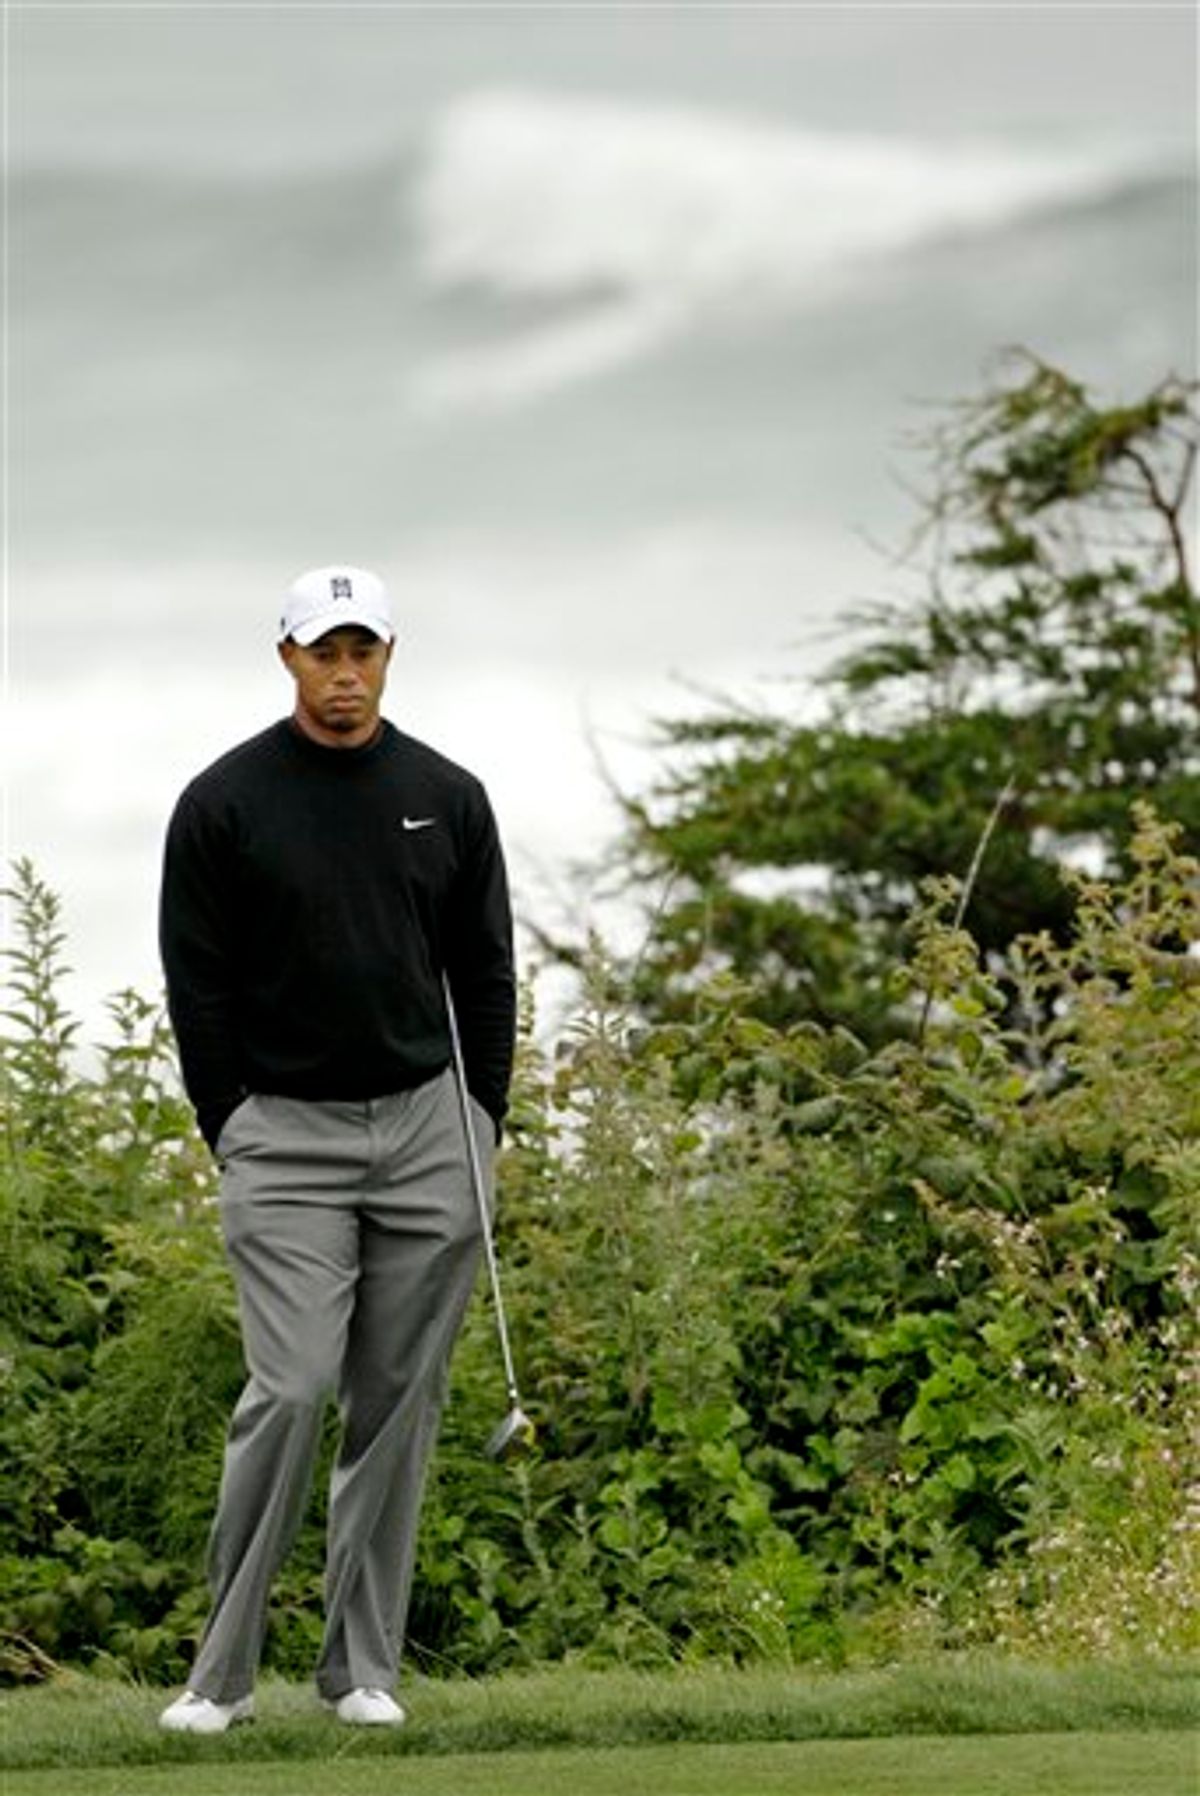 Tiger Woods waits to tee off on the 11th hole during a practice round for the U.S. Open golf tournament Tuesday, June 15, 2010, at the Pebble Beach Golf Links in Pebble Beach, Calif. (AP Photo/David J. Phillip) (AP)